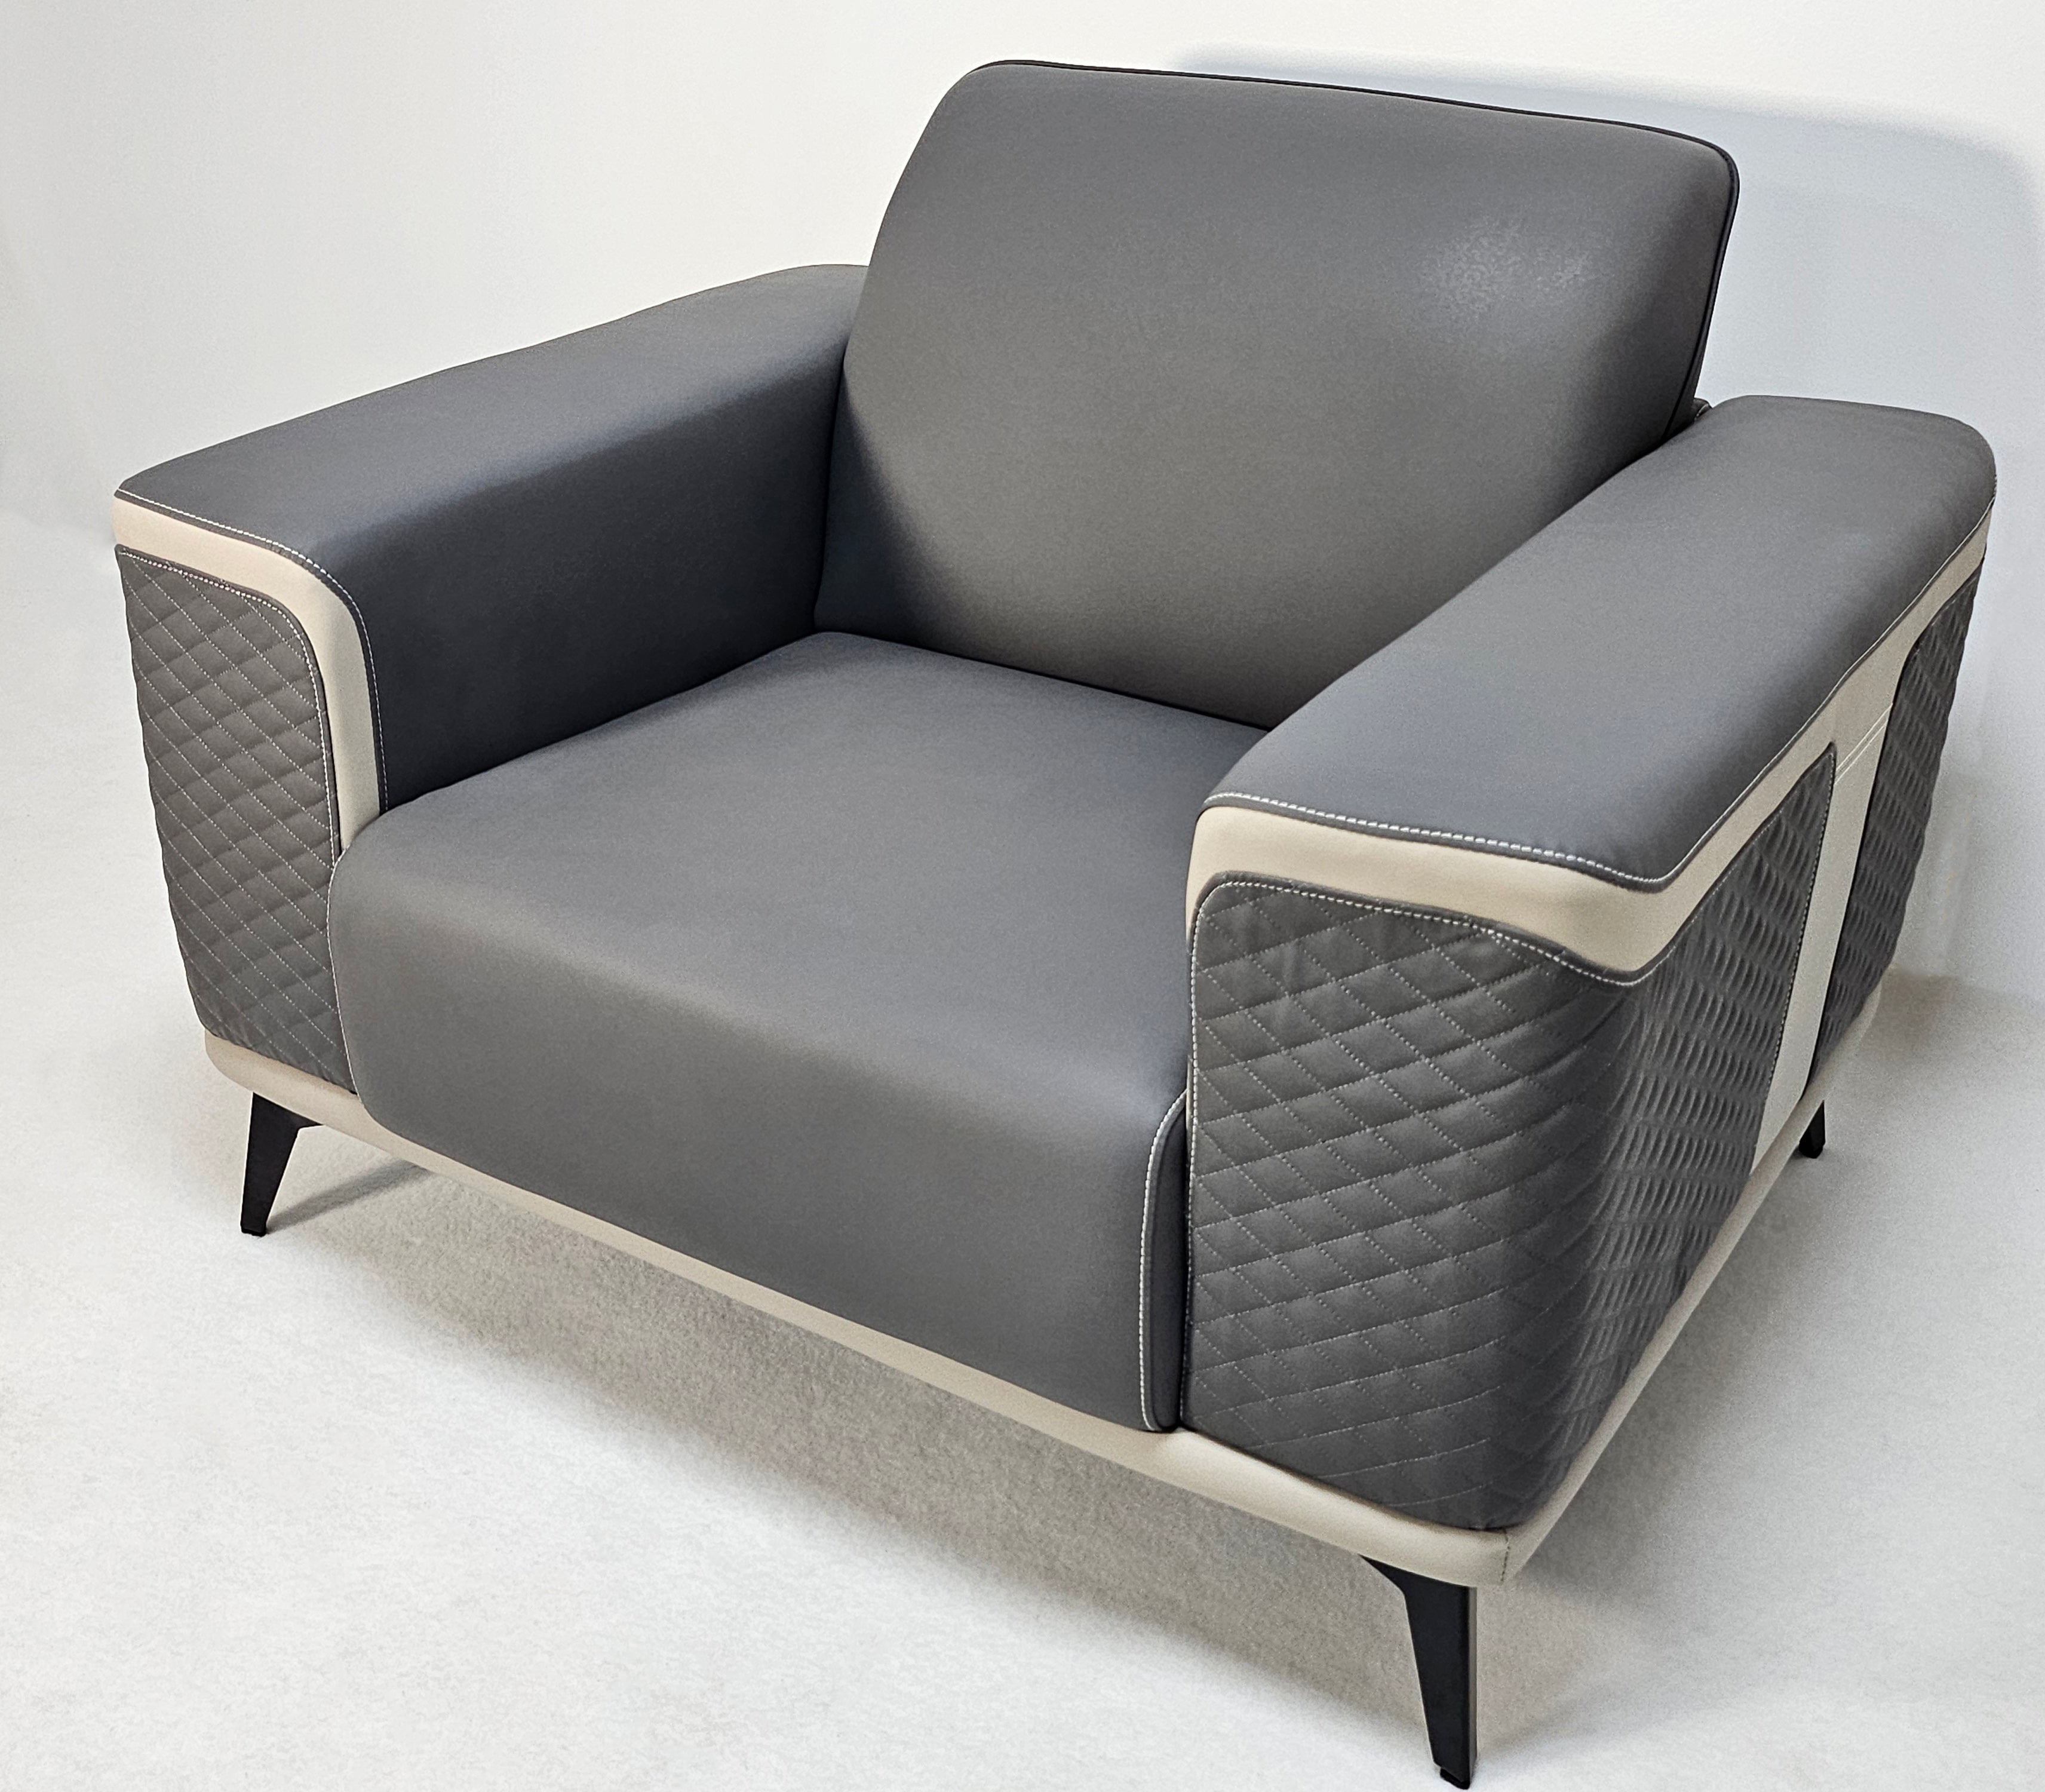 Modern Grey Leather with Cream Leather Trim Sofa - One and Triple Seat Available - JF119